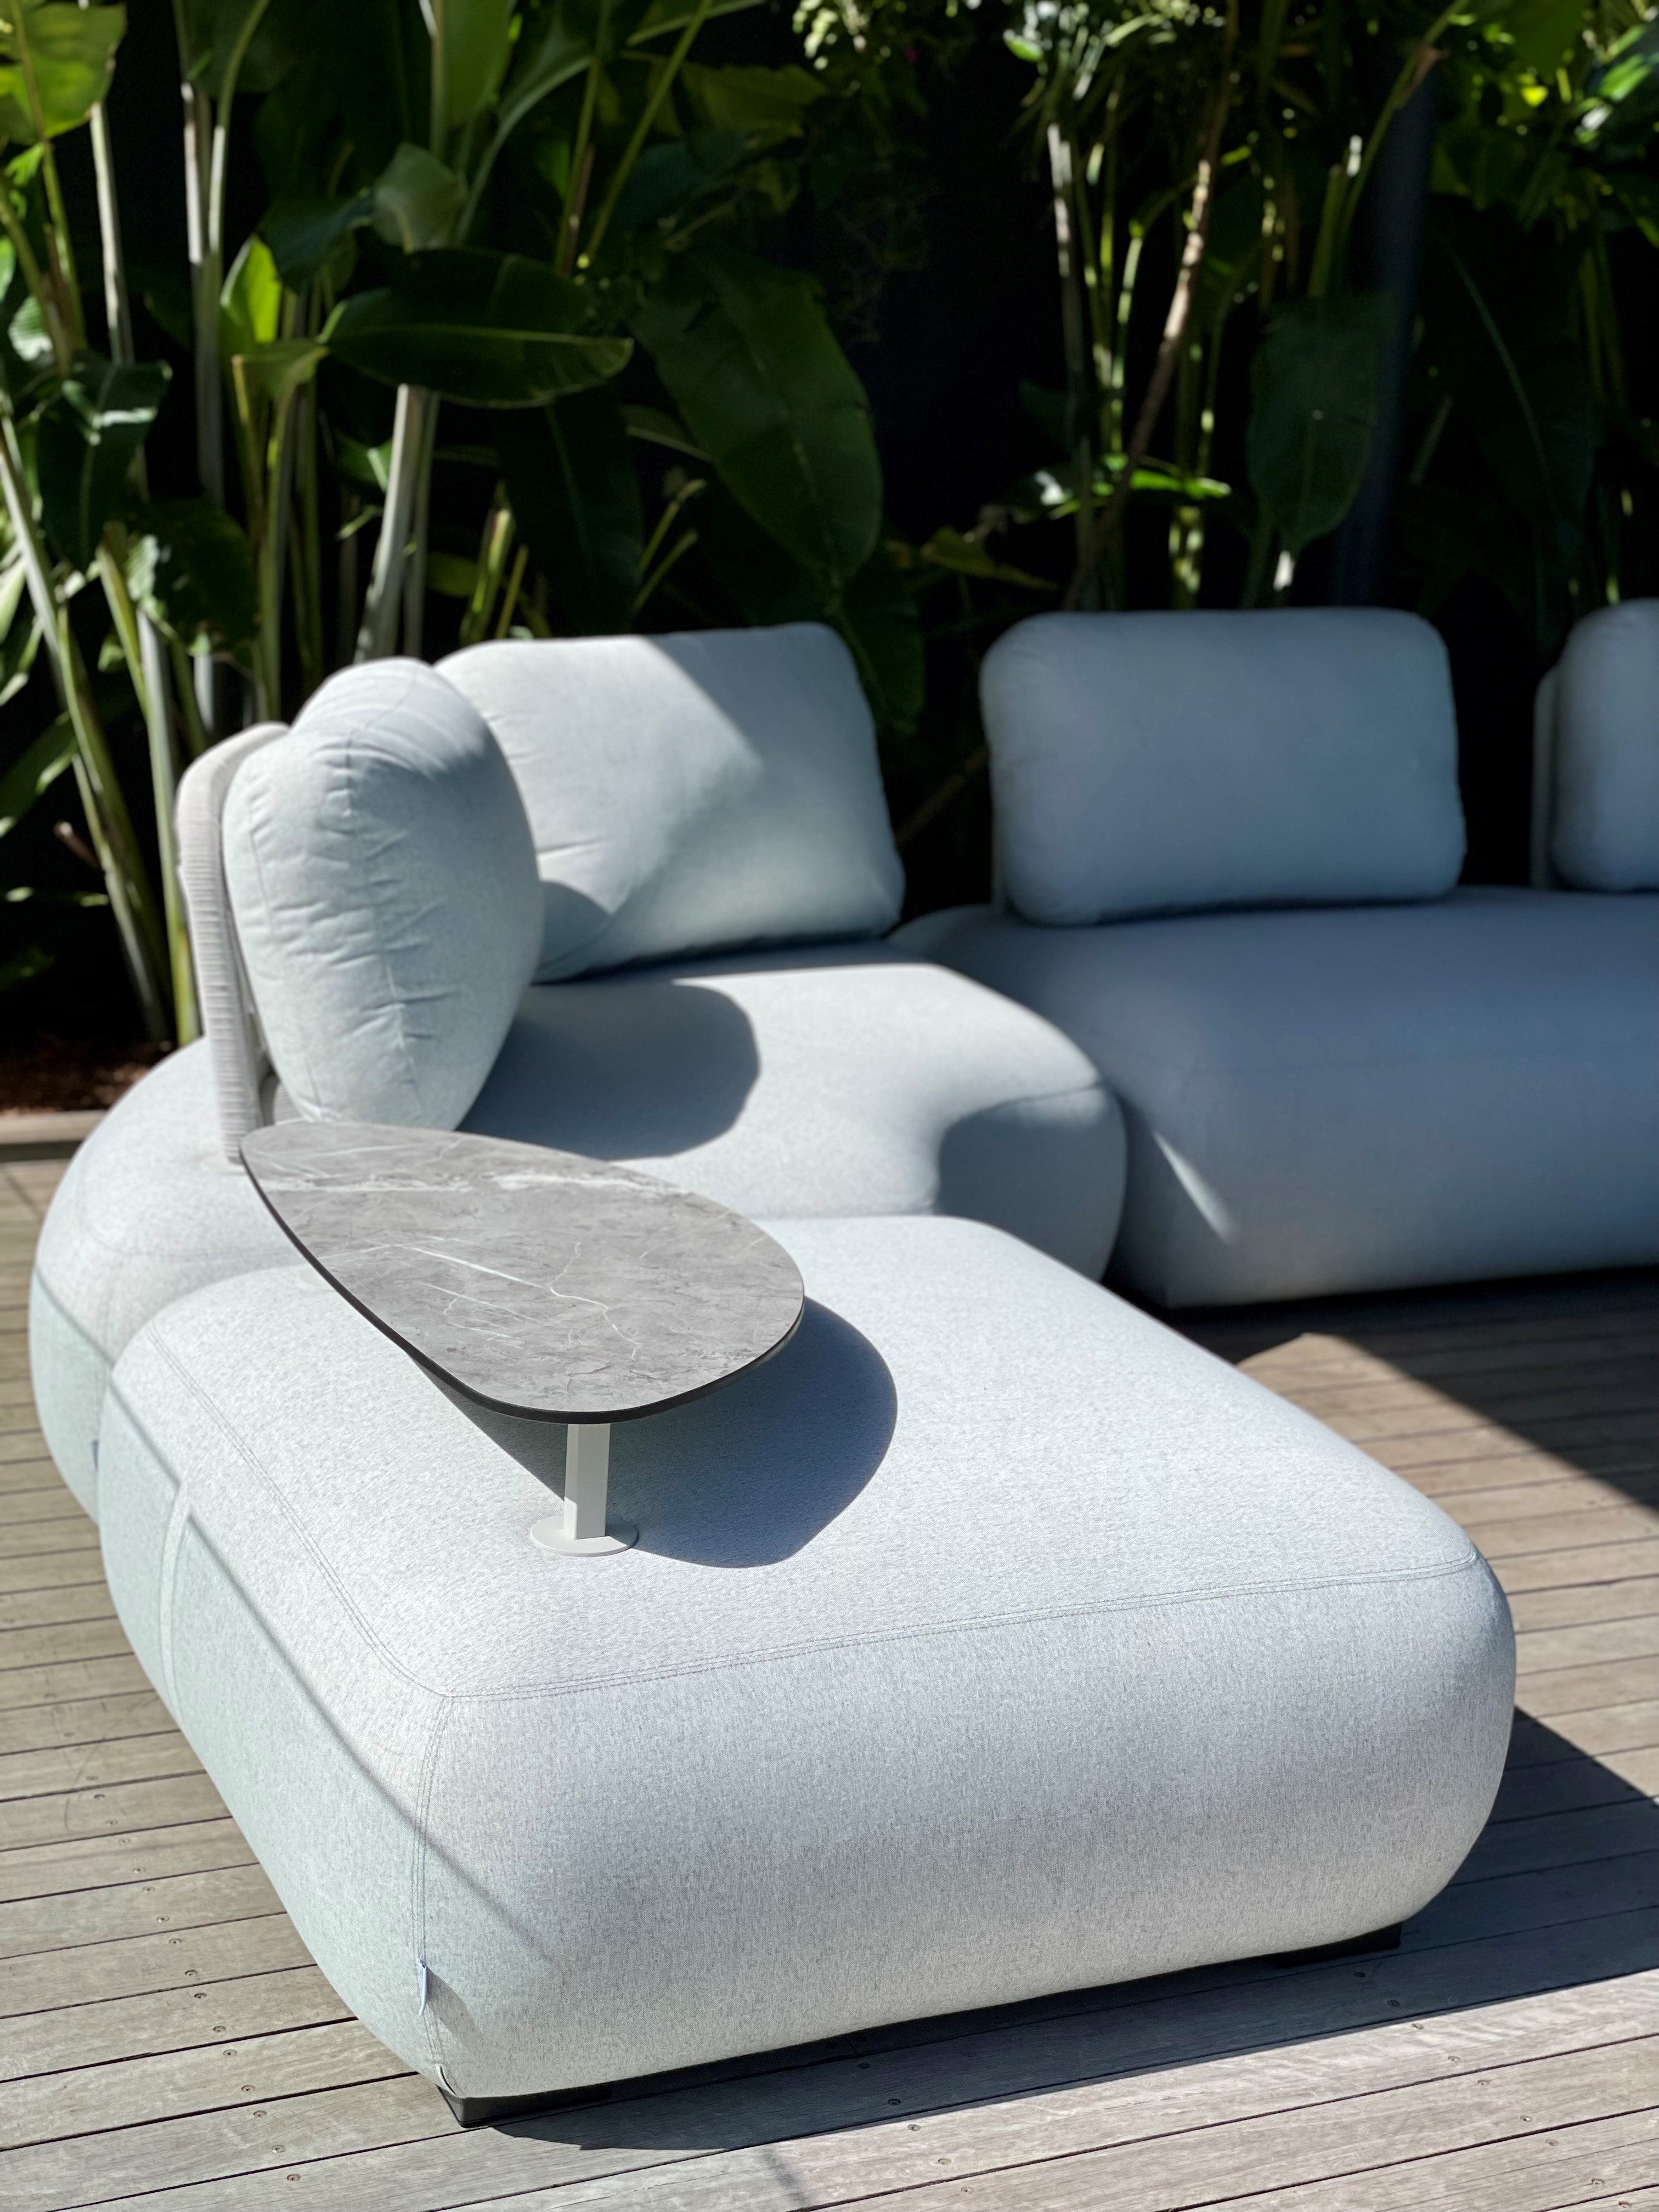 Relaxation Redefined: Embracing Comfort and Style with Outdoor Lounge Chairs - Olan Living